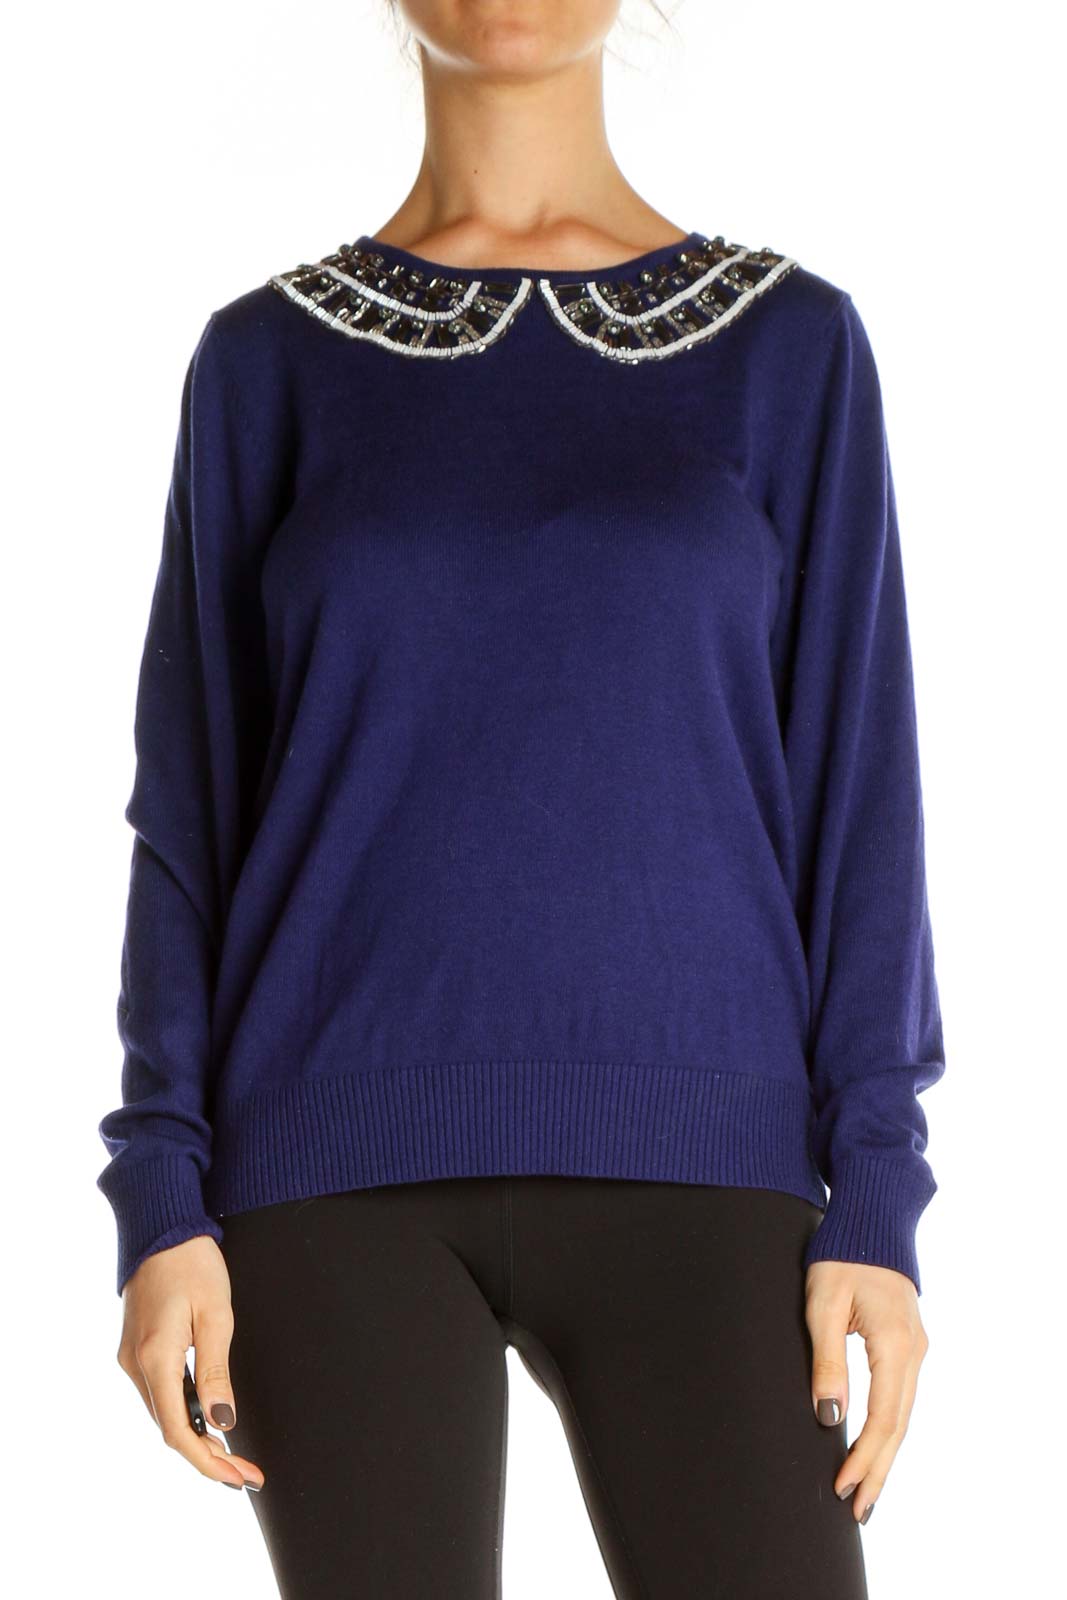 Blue Solid All Day Wear Sweater Front